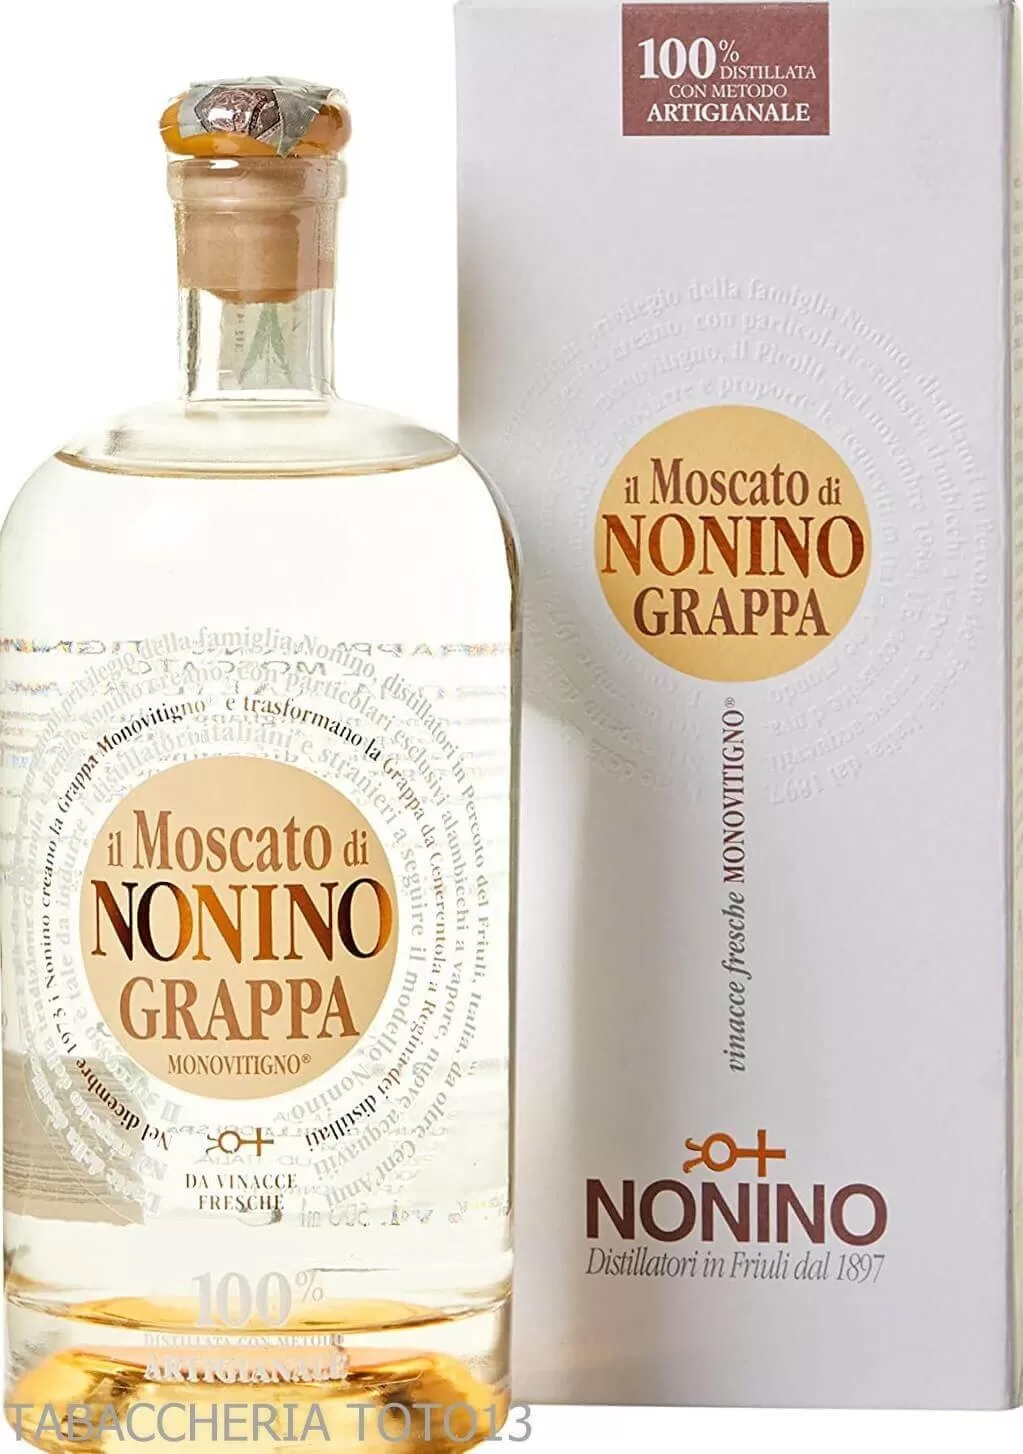 Nonino | Moscato selling bottle 500ml single-variety grappa Online